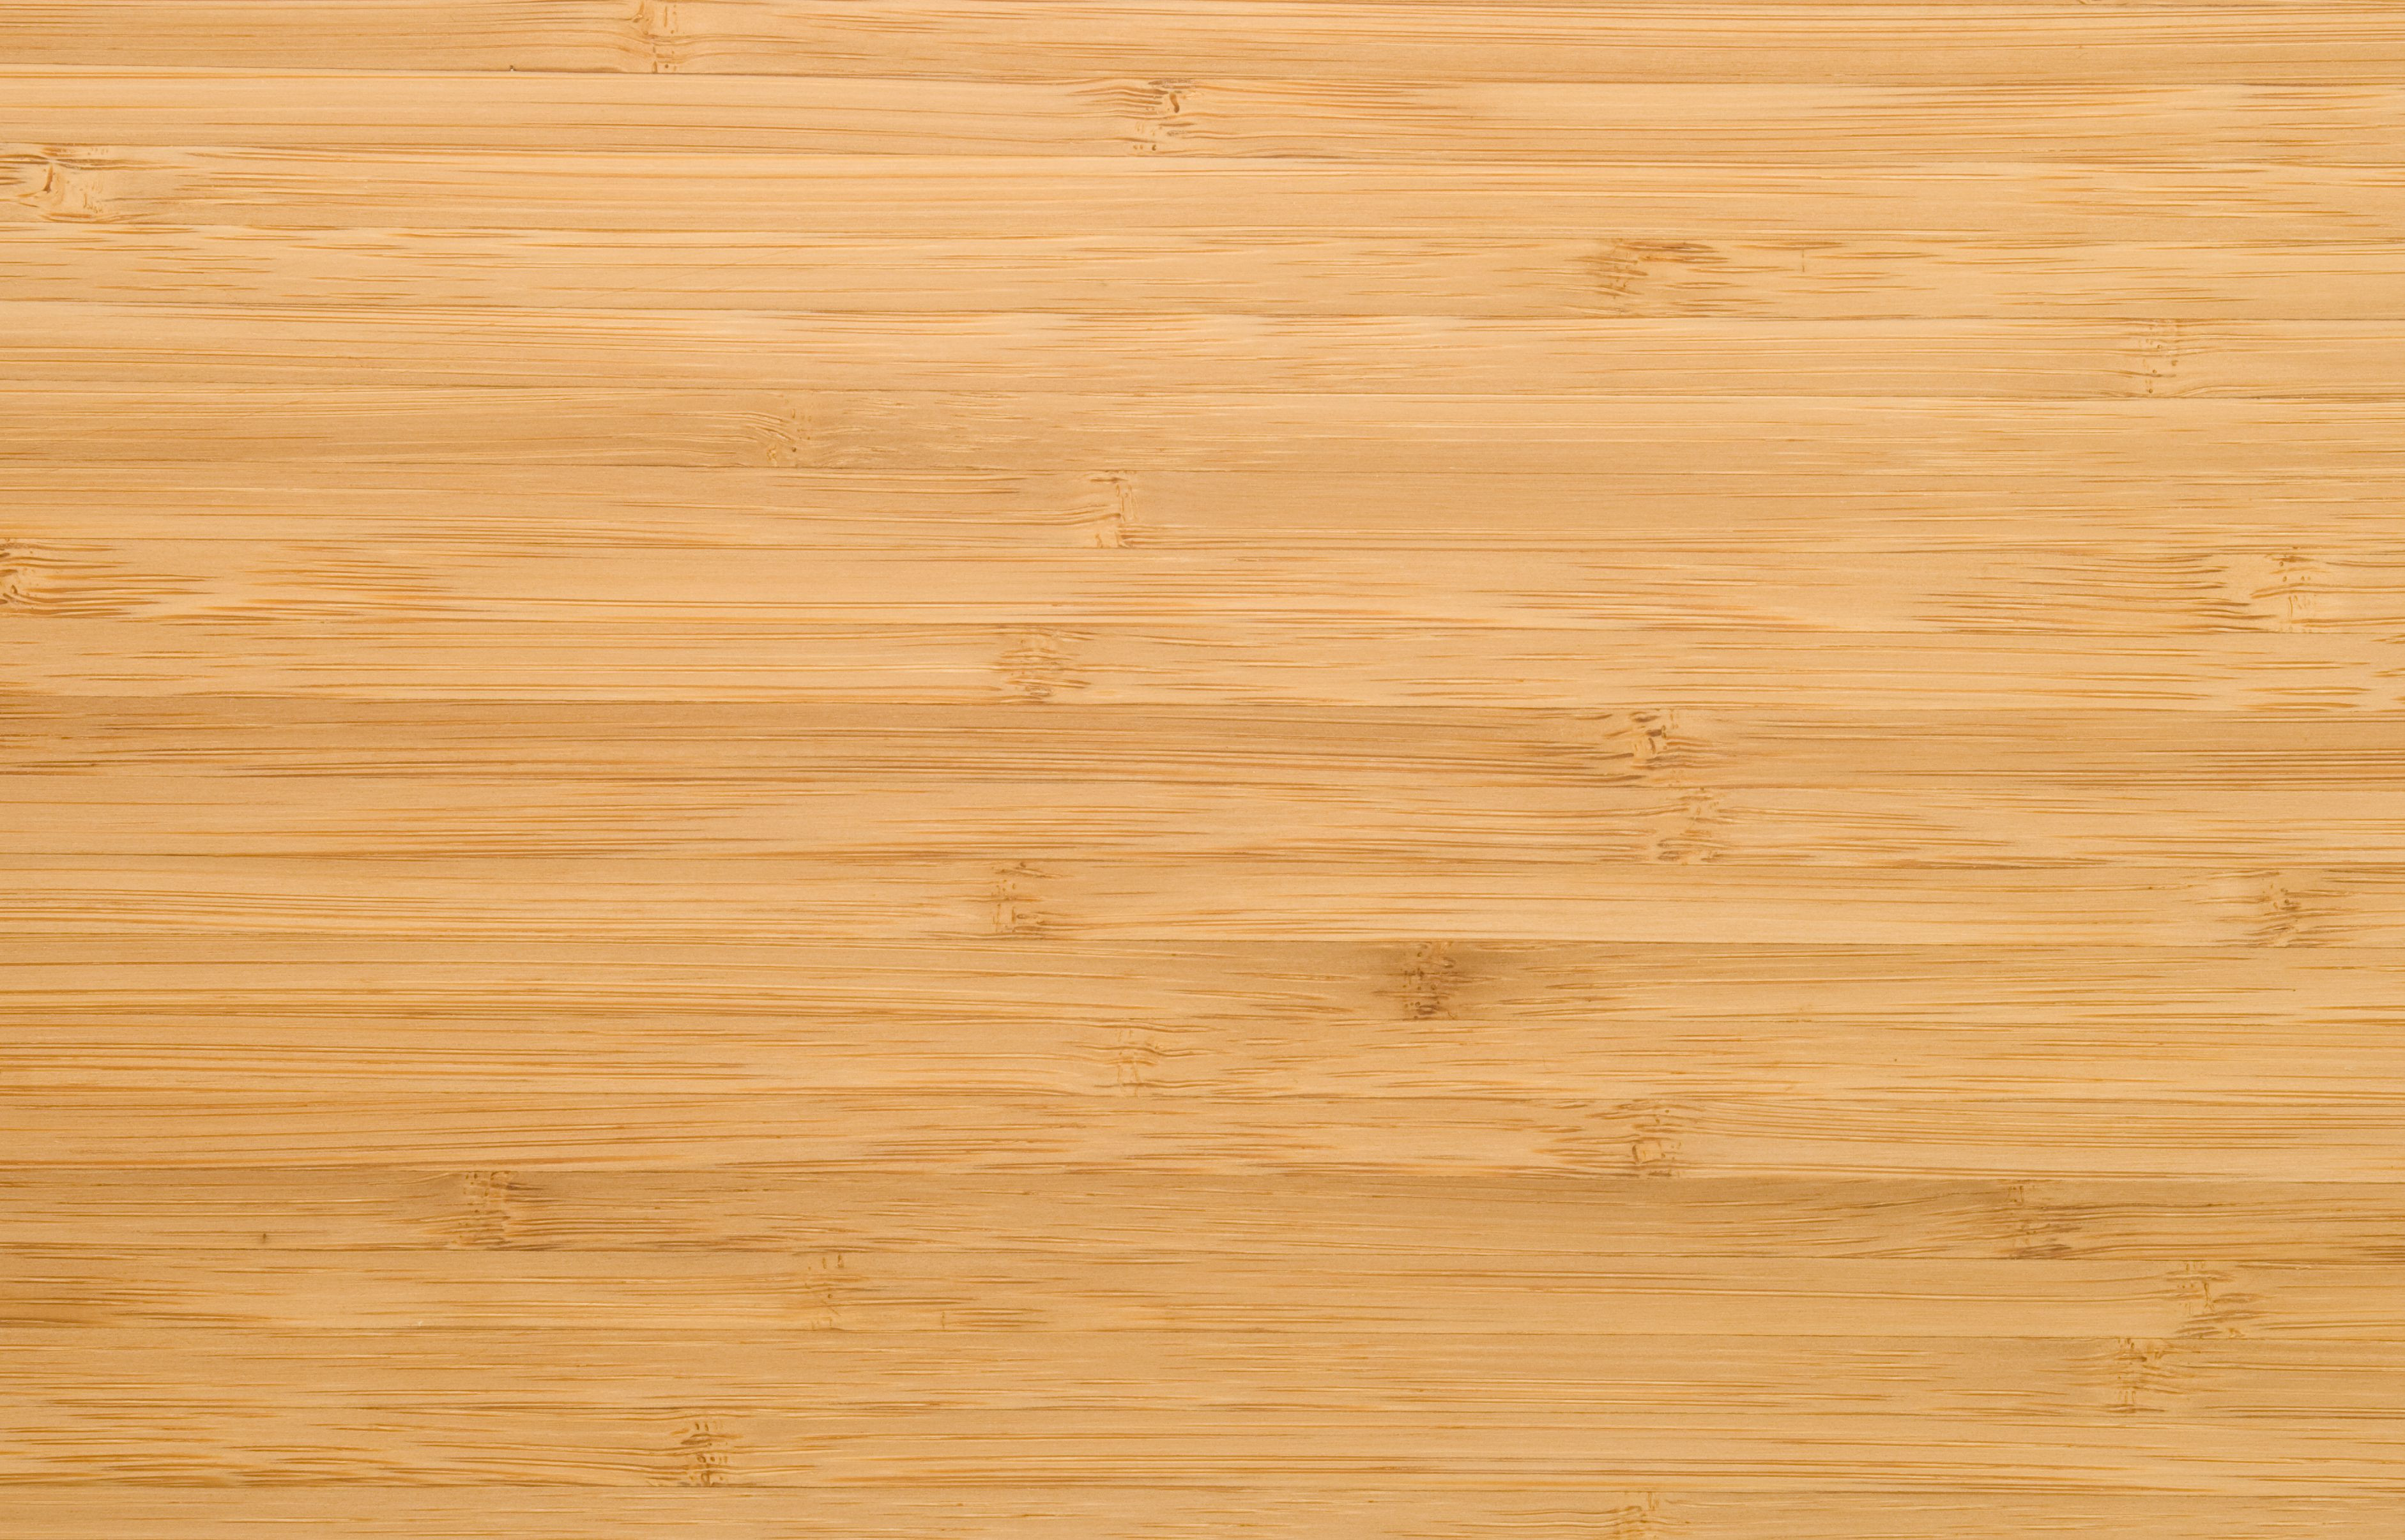 23 Spectacular Bamboo Hardwood Flooring Prices 2024 free download bamboo hardwood flooring prices of can you use a wet mop on bamboo floors within natural bamboo plank 94259870 59aeefd4519de20010d5c648